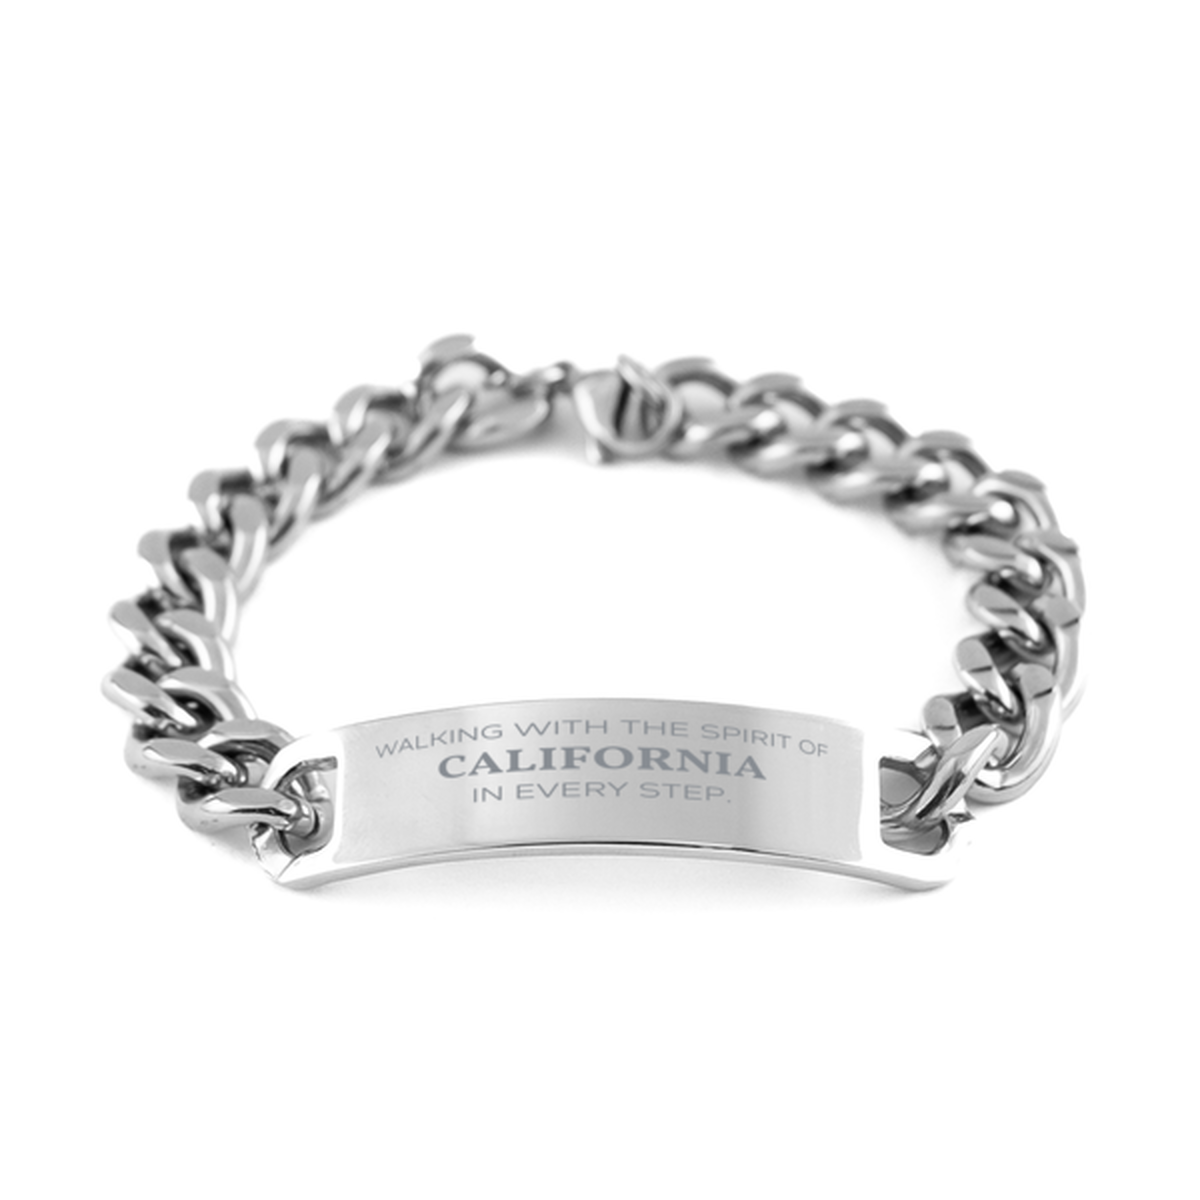 California Gifts, Walking with the spirit, Love California Birthday Christmas Cuban Chain Stainless Steel Bracelet For California People, Men, Women, Friends